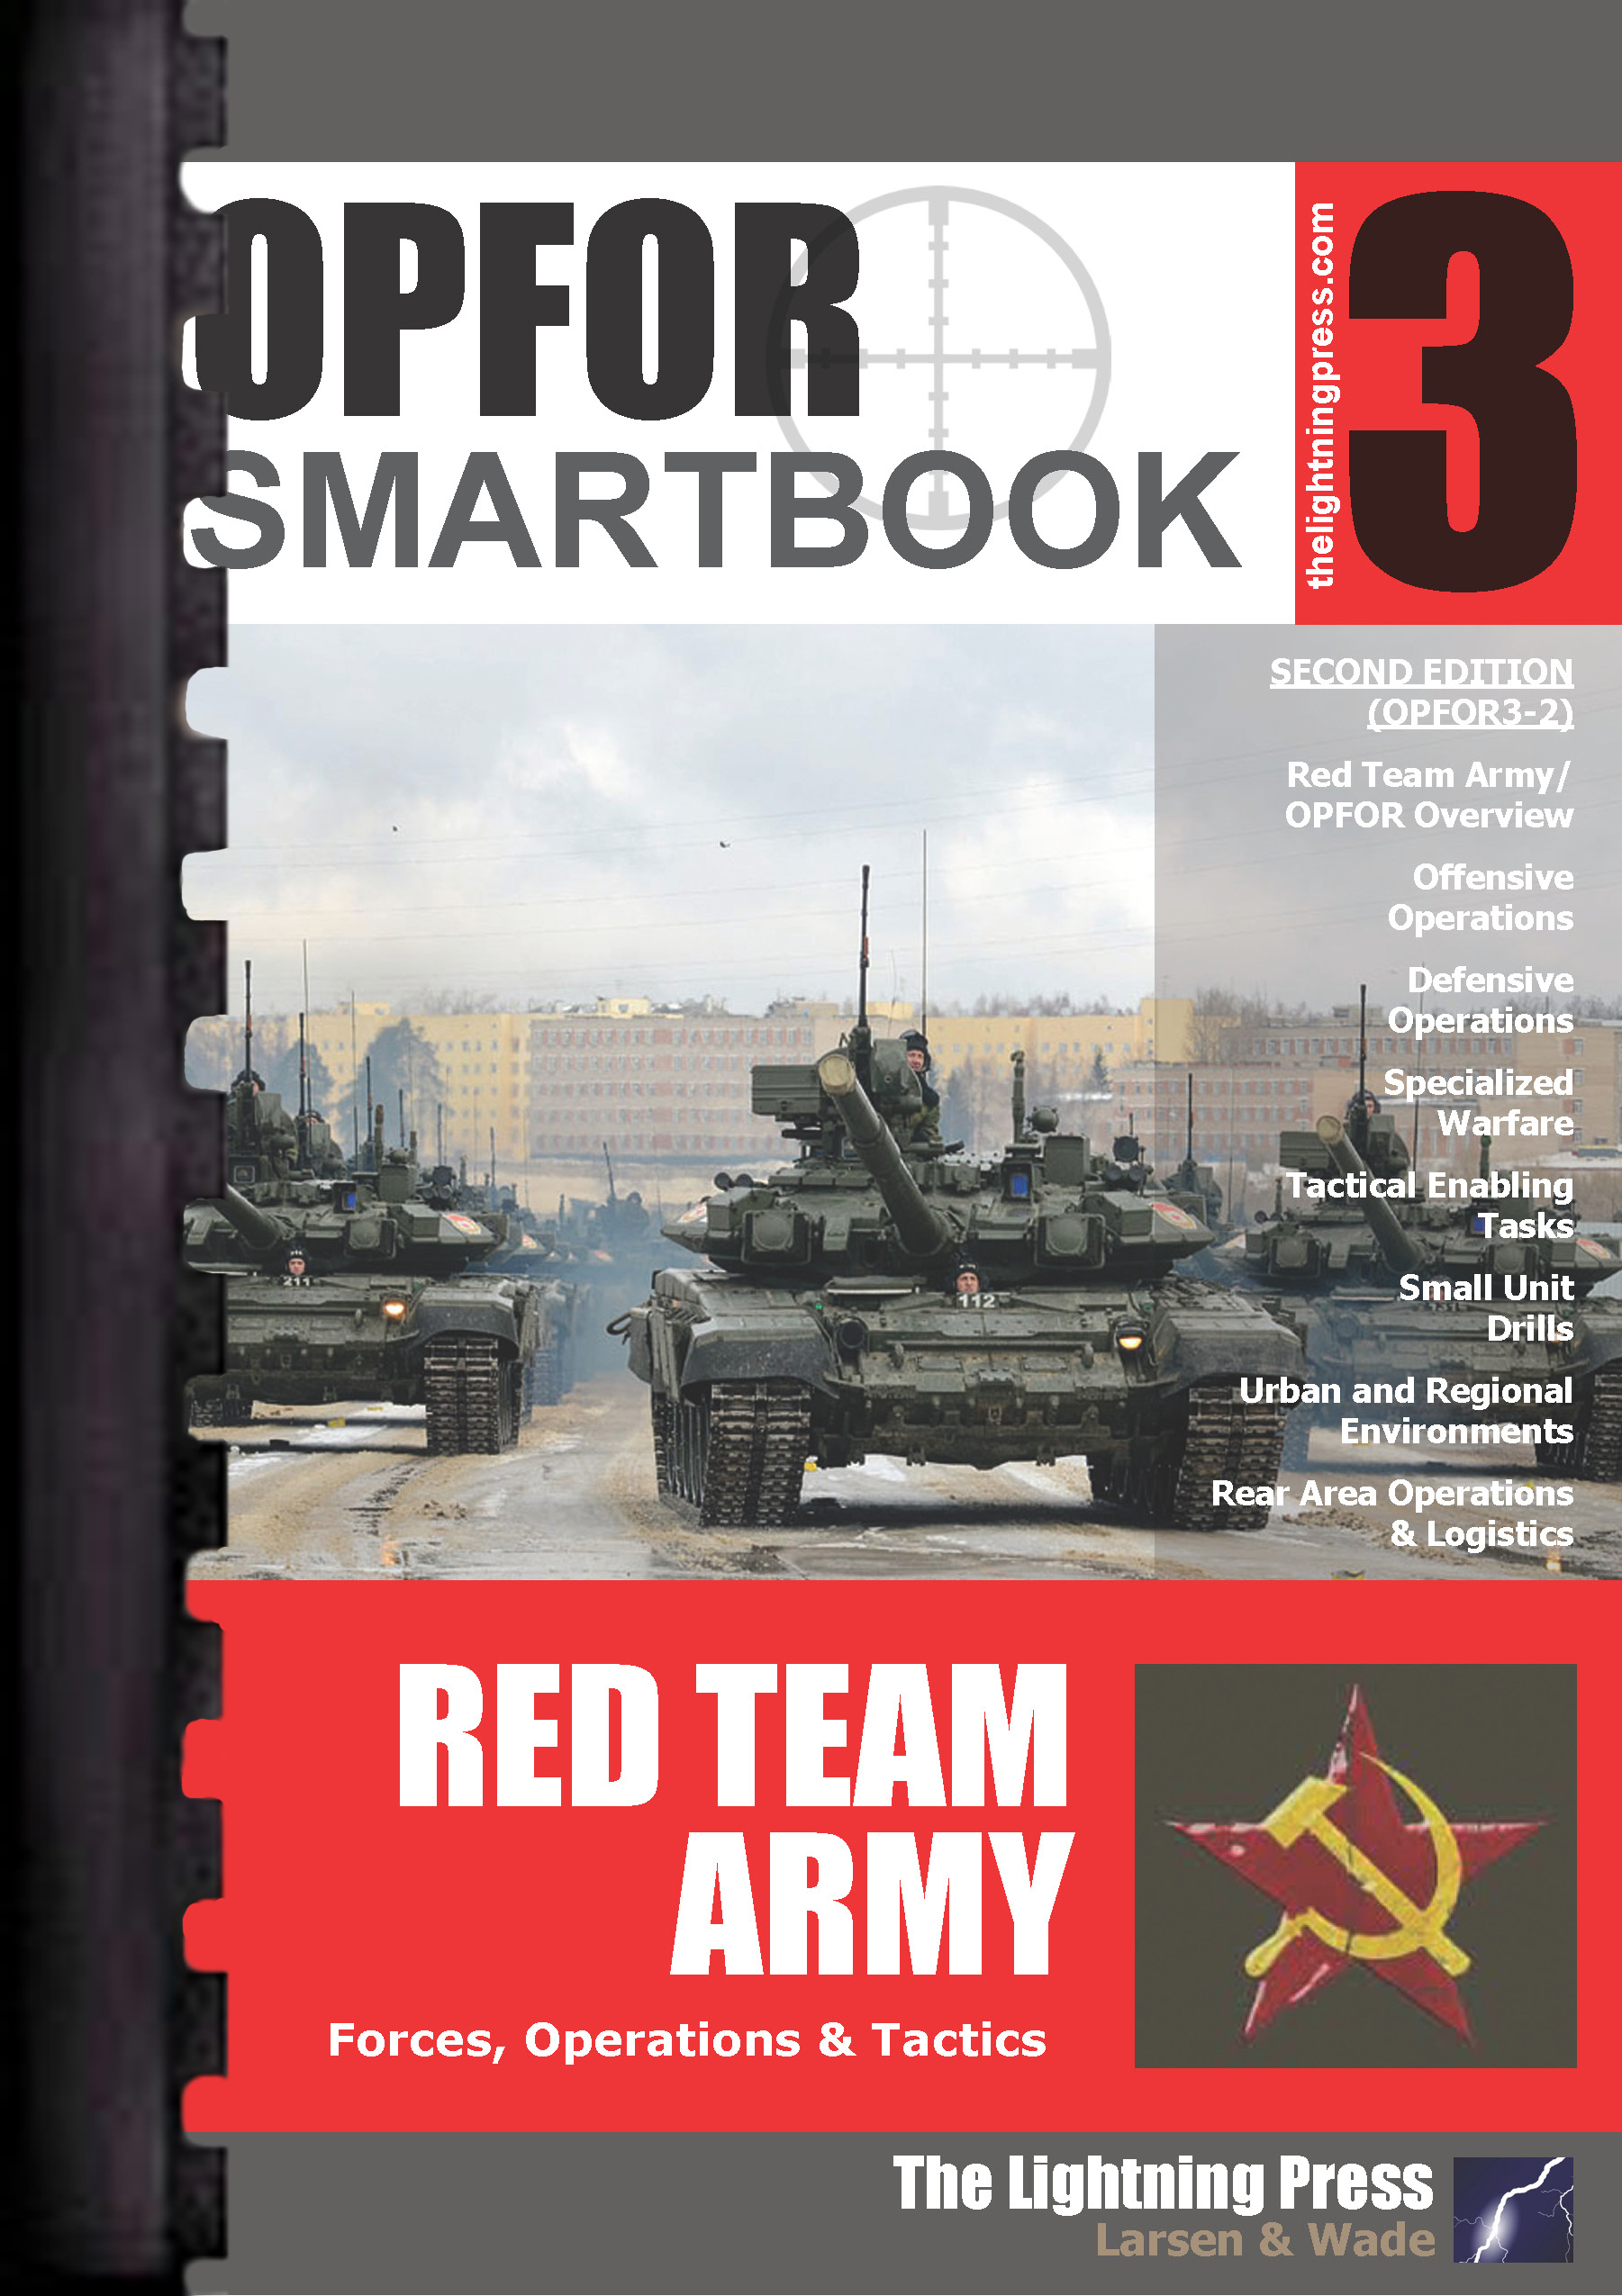 OPFOR SMARTbook 3 -  Red Team Army, 2nd Ed.